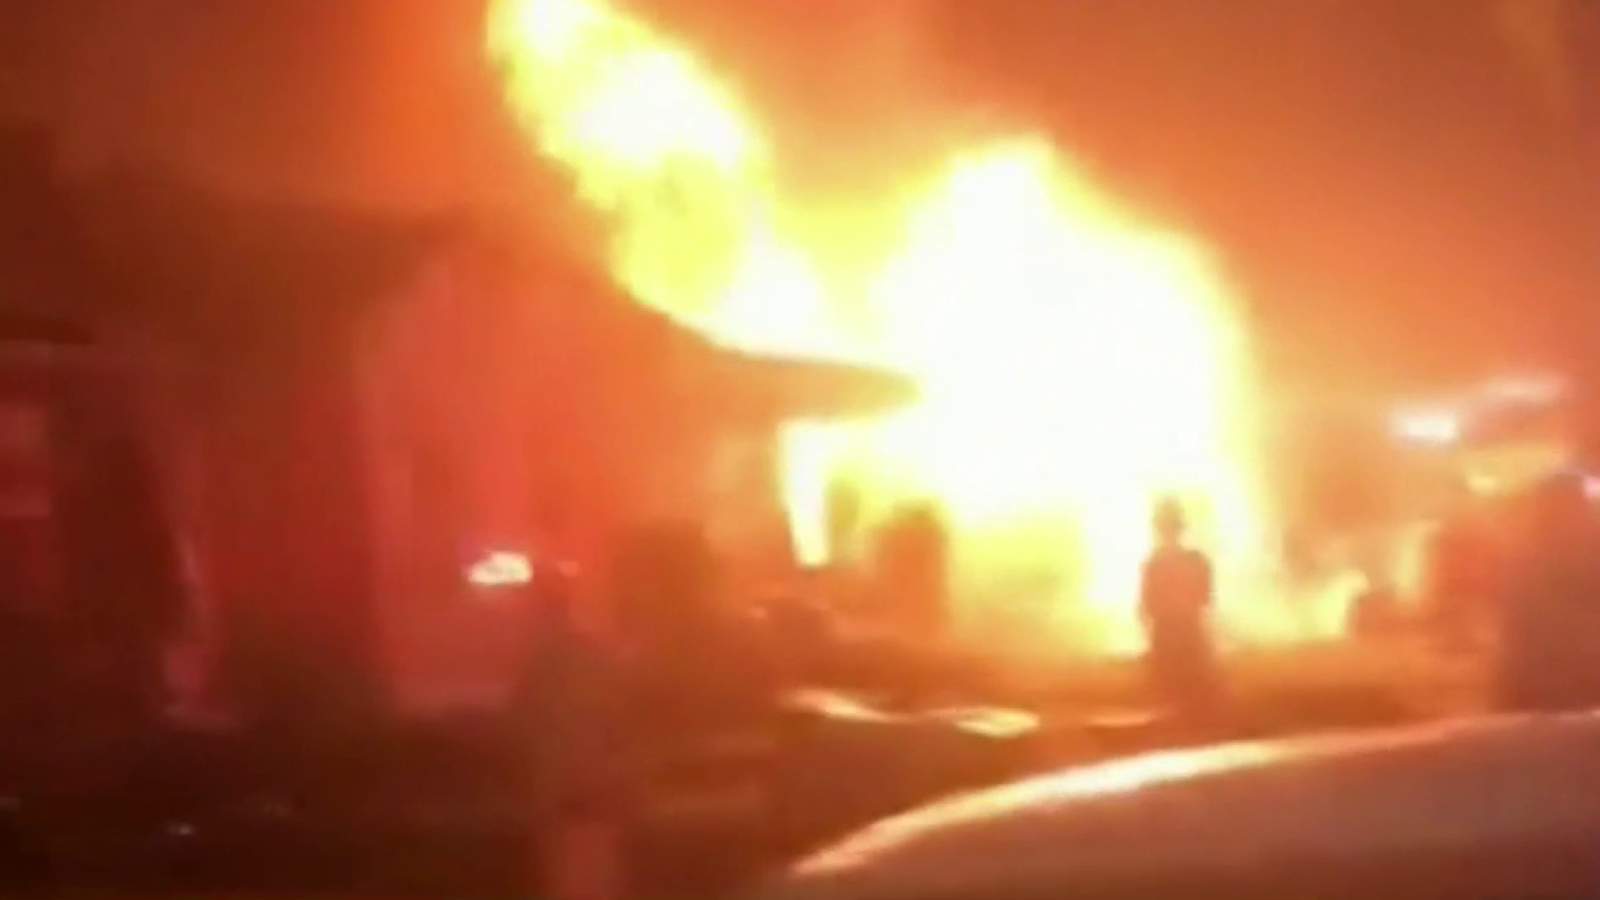 Detroit house fire being investigated as potential homicide after 3 bodies found inside